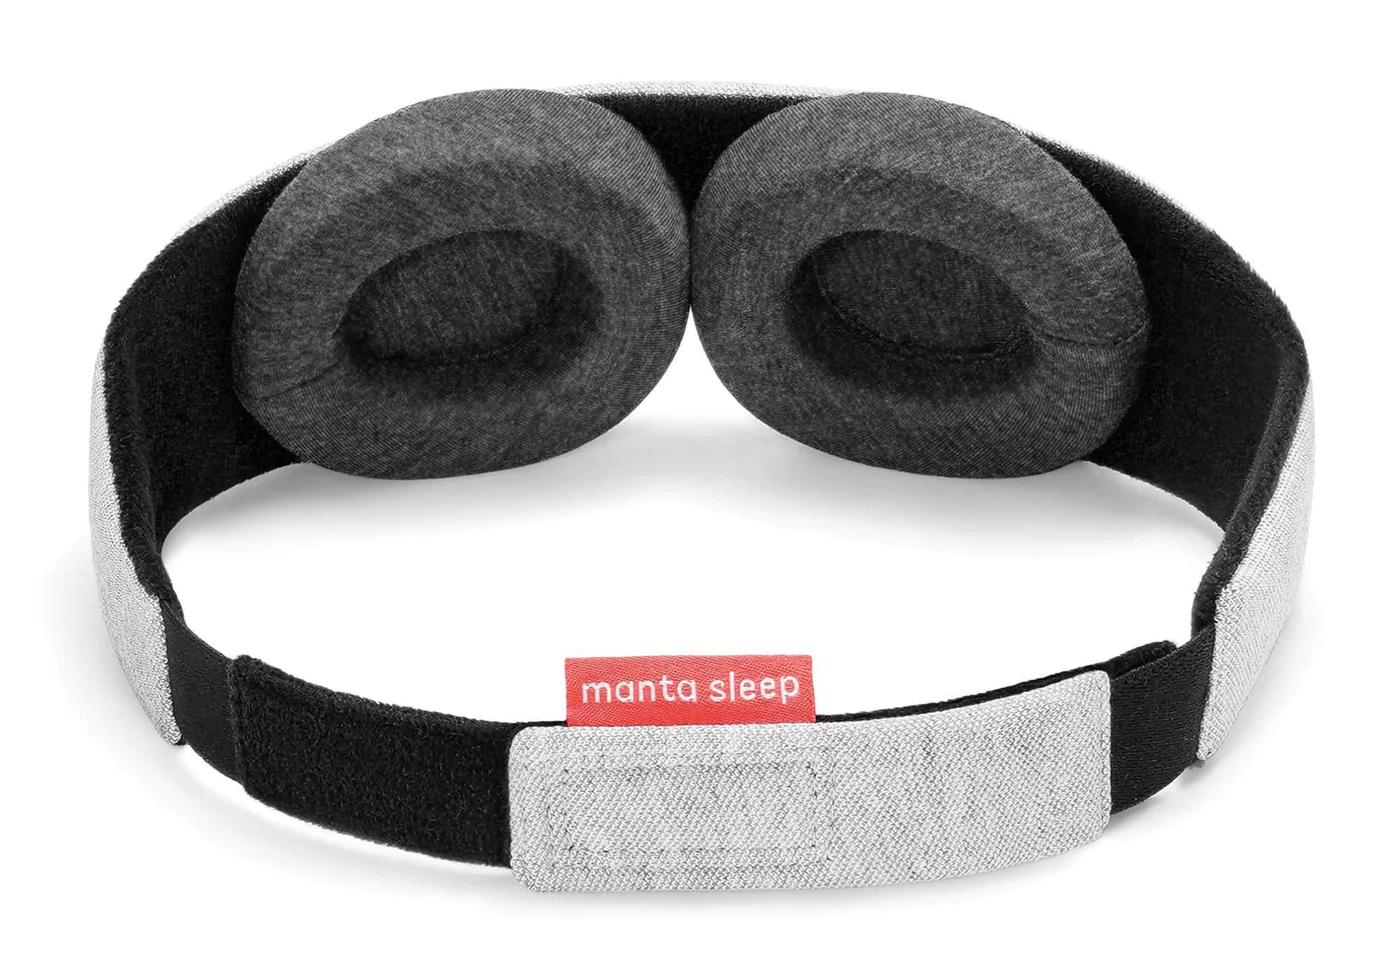 The black interior of a sleep mask with 2 dark gray eye cups.